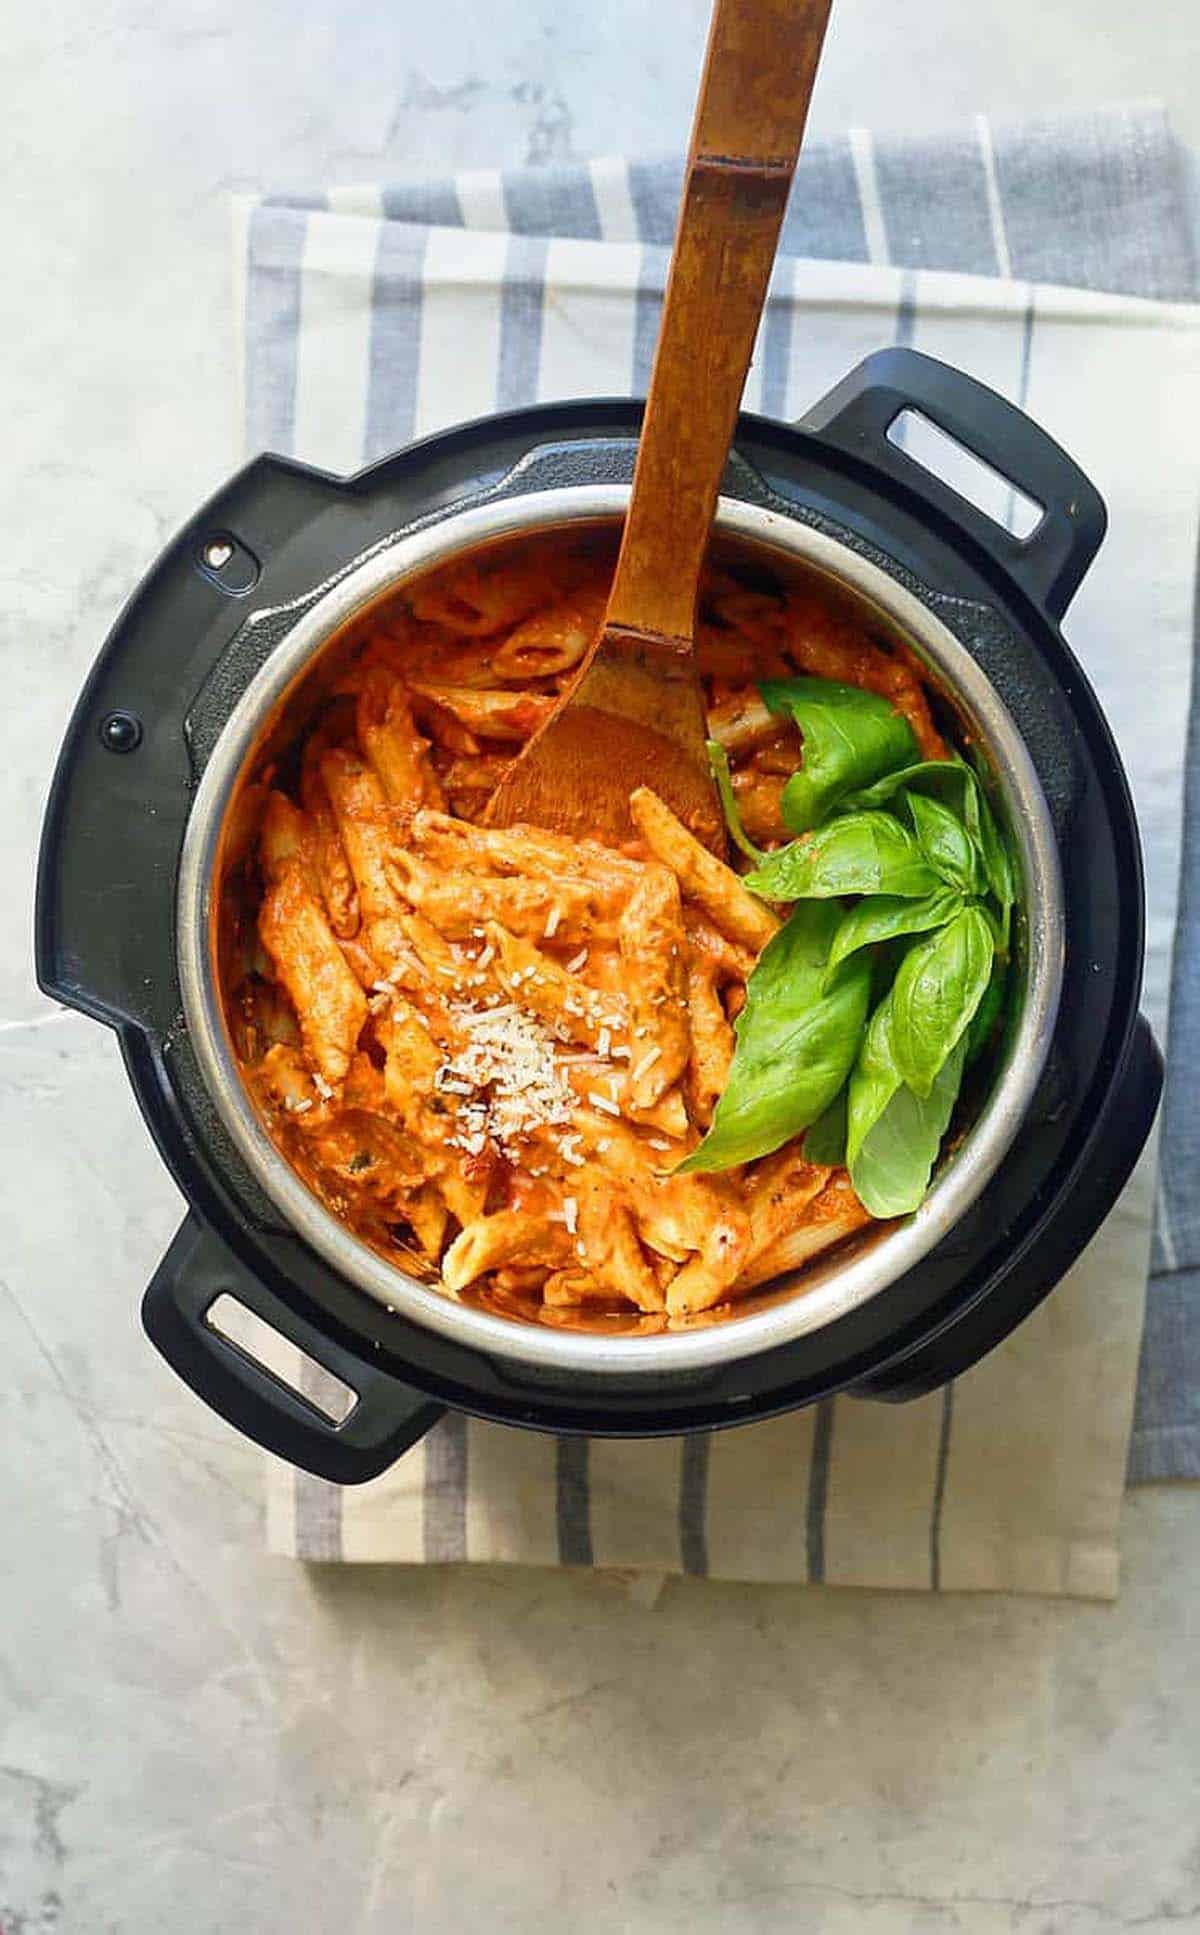 an instant pot filled with cooked pasta and garnished with fresh basil leaves.